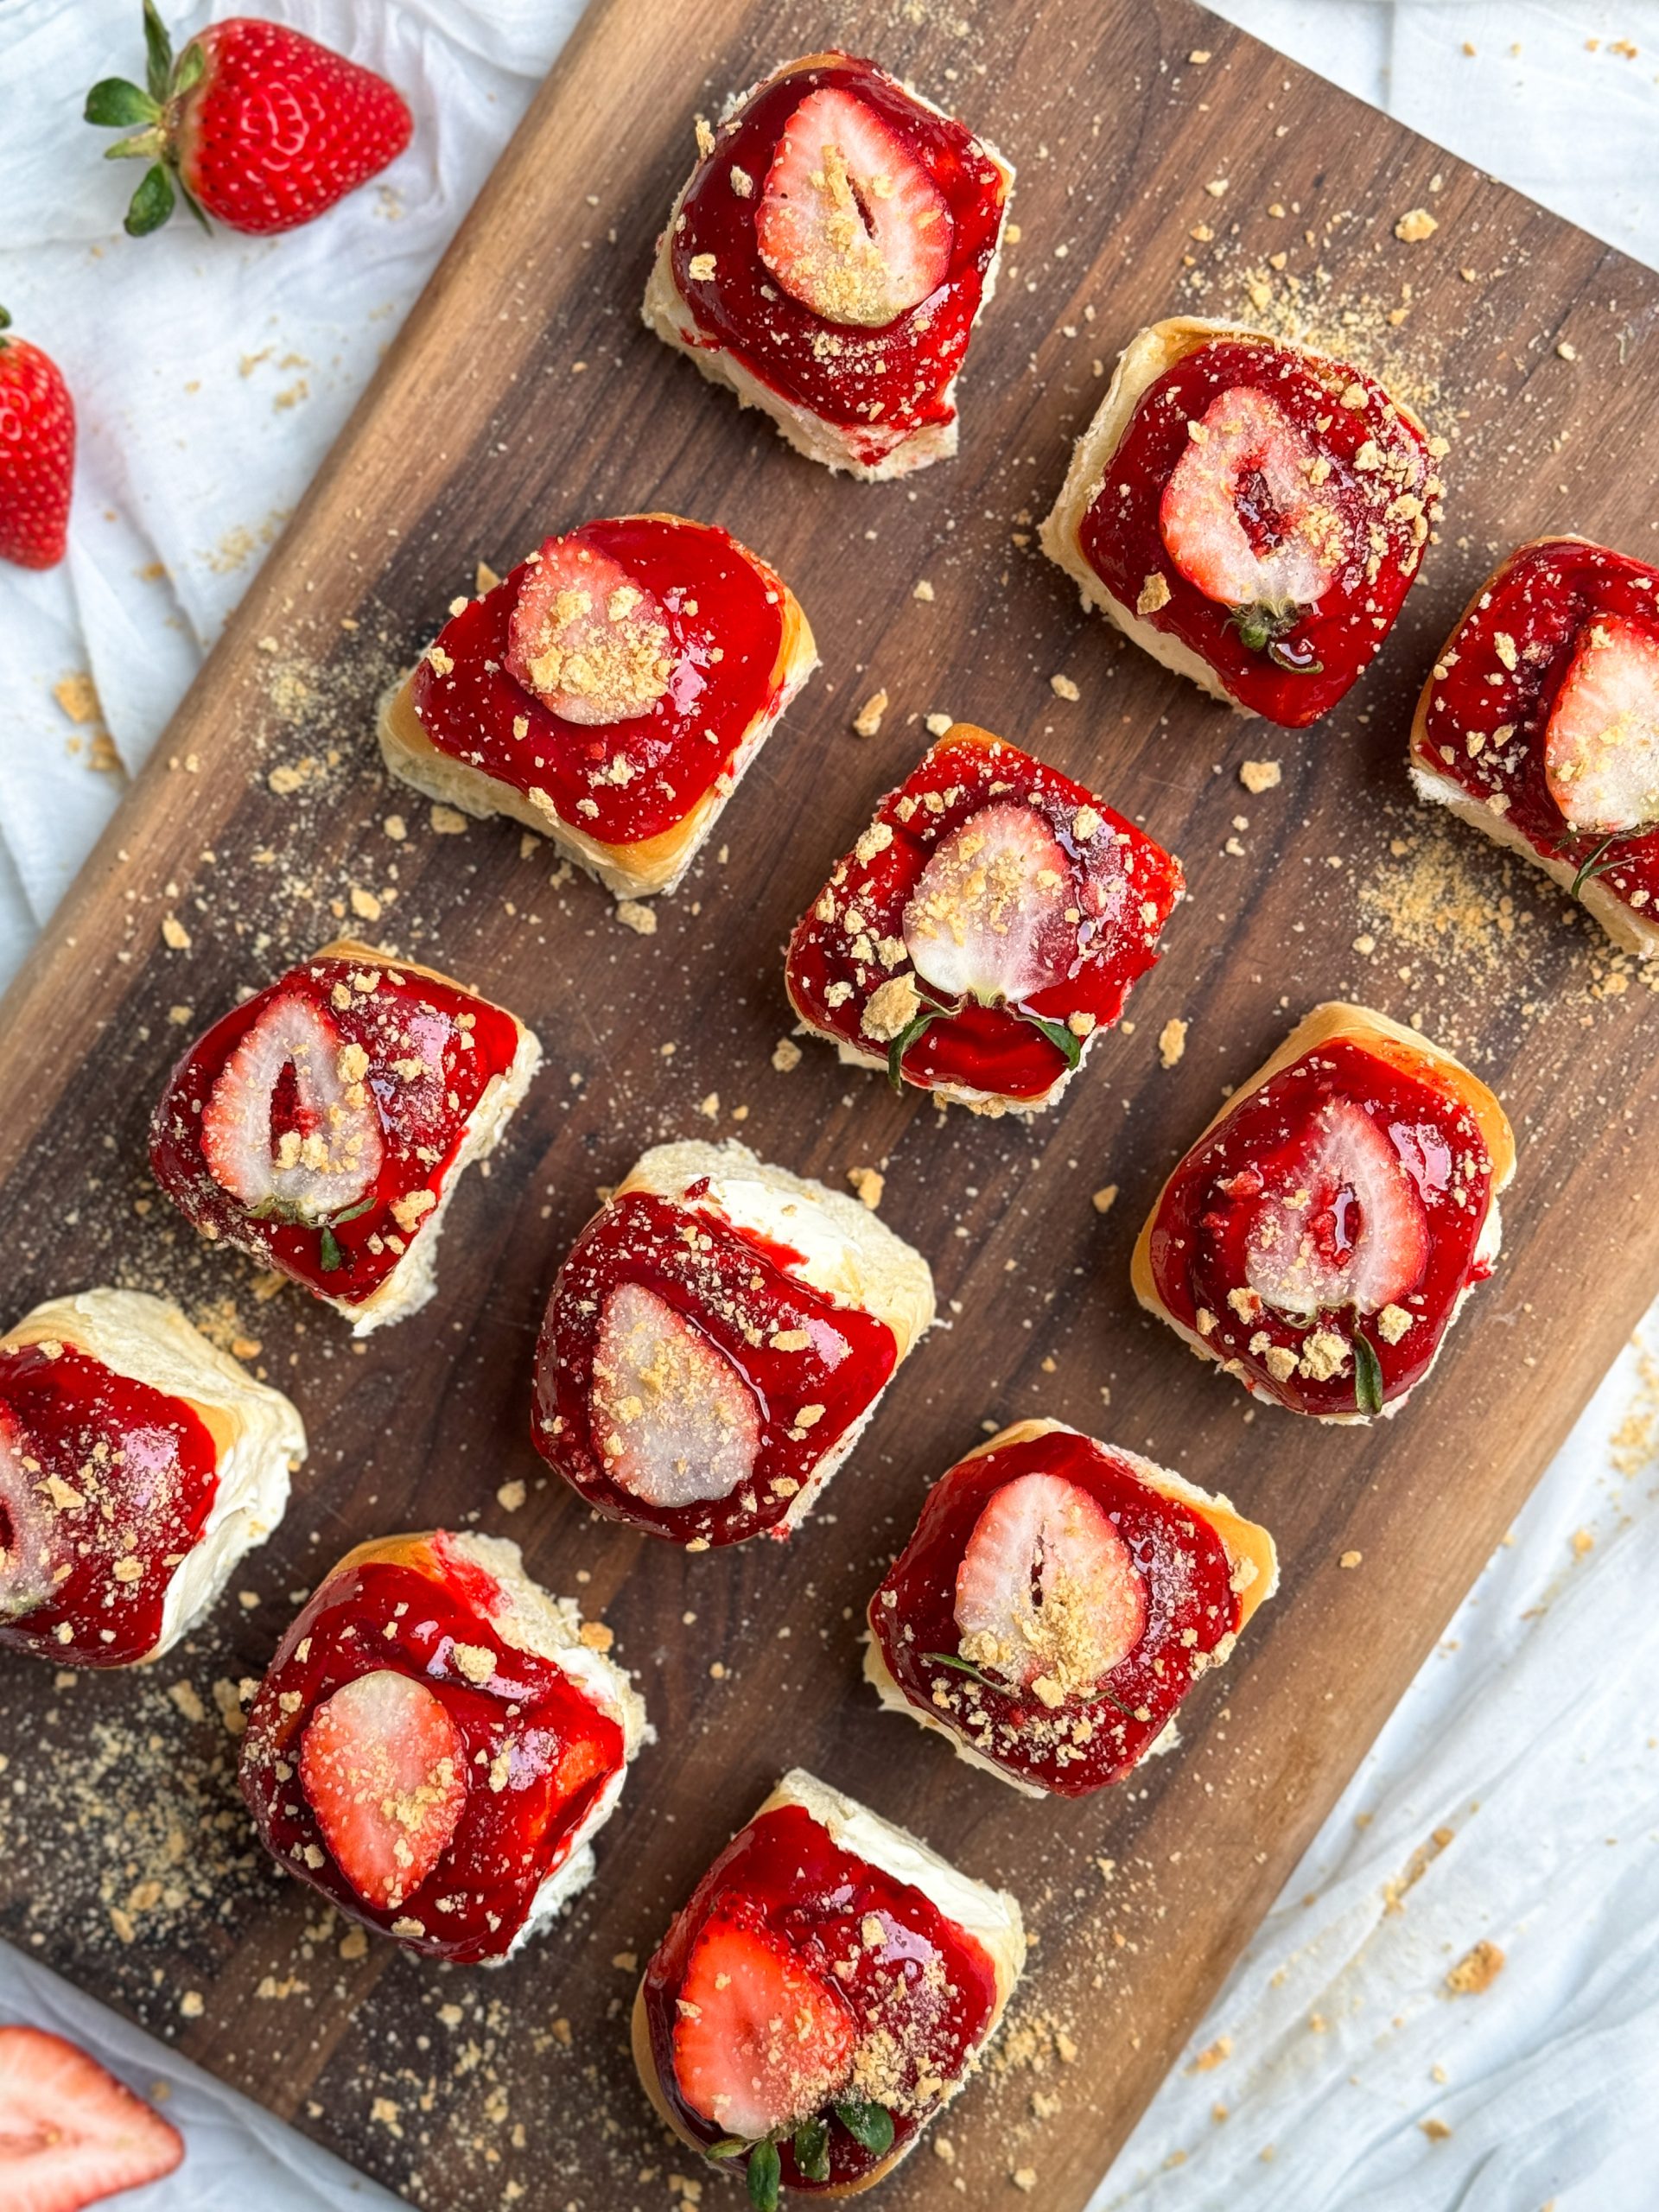 12 strawberry cheesecake buns on a wooden cutting board. buns are filled with a cheesecake filling, topped with a shiny strawberry glaze, and decorated with strawberries and crushed graham crackers. picture from the top